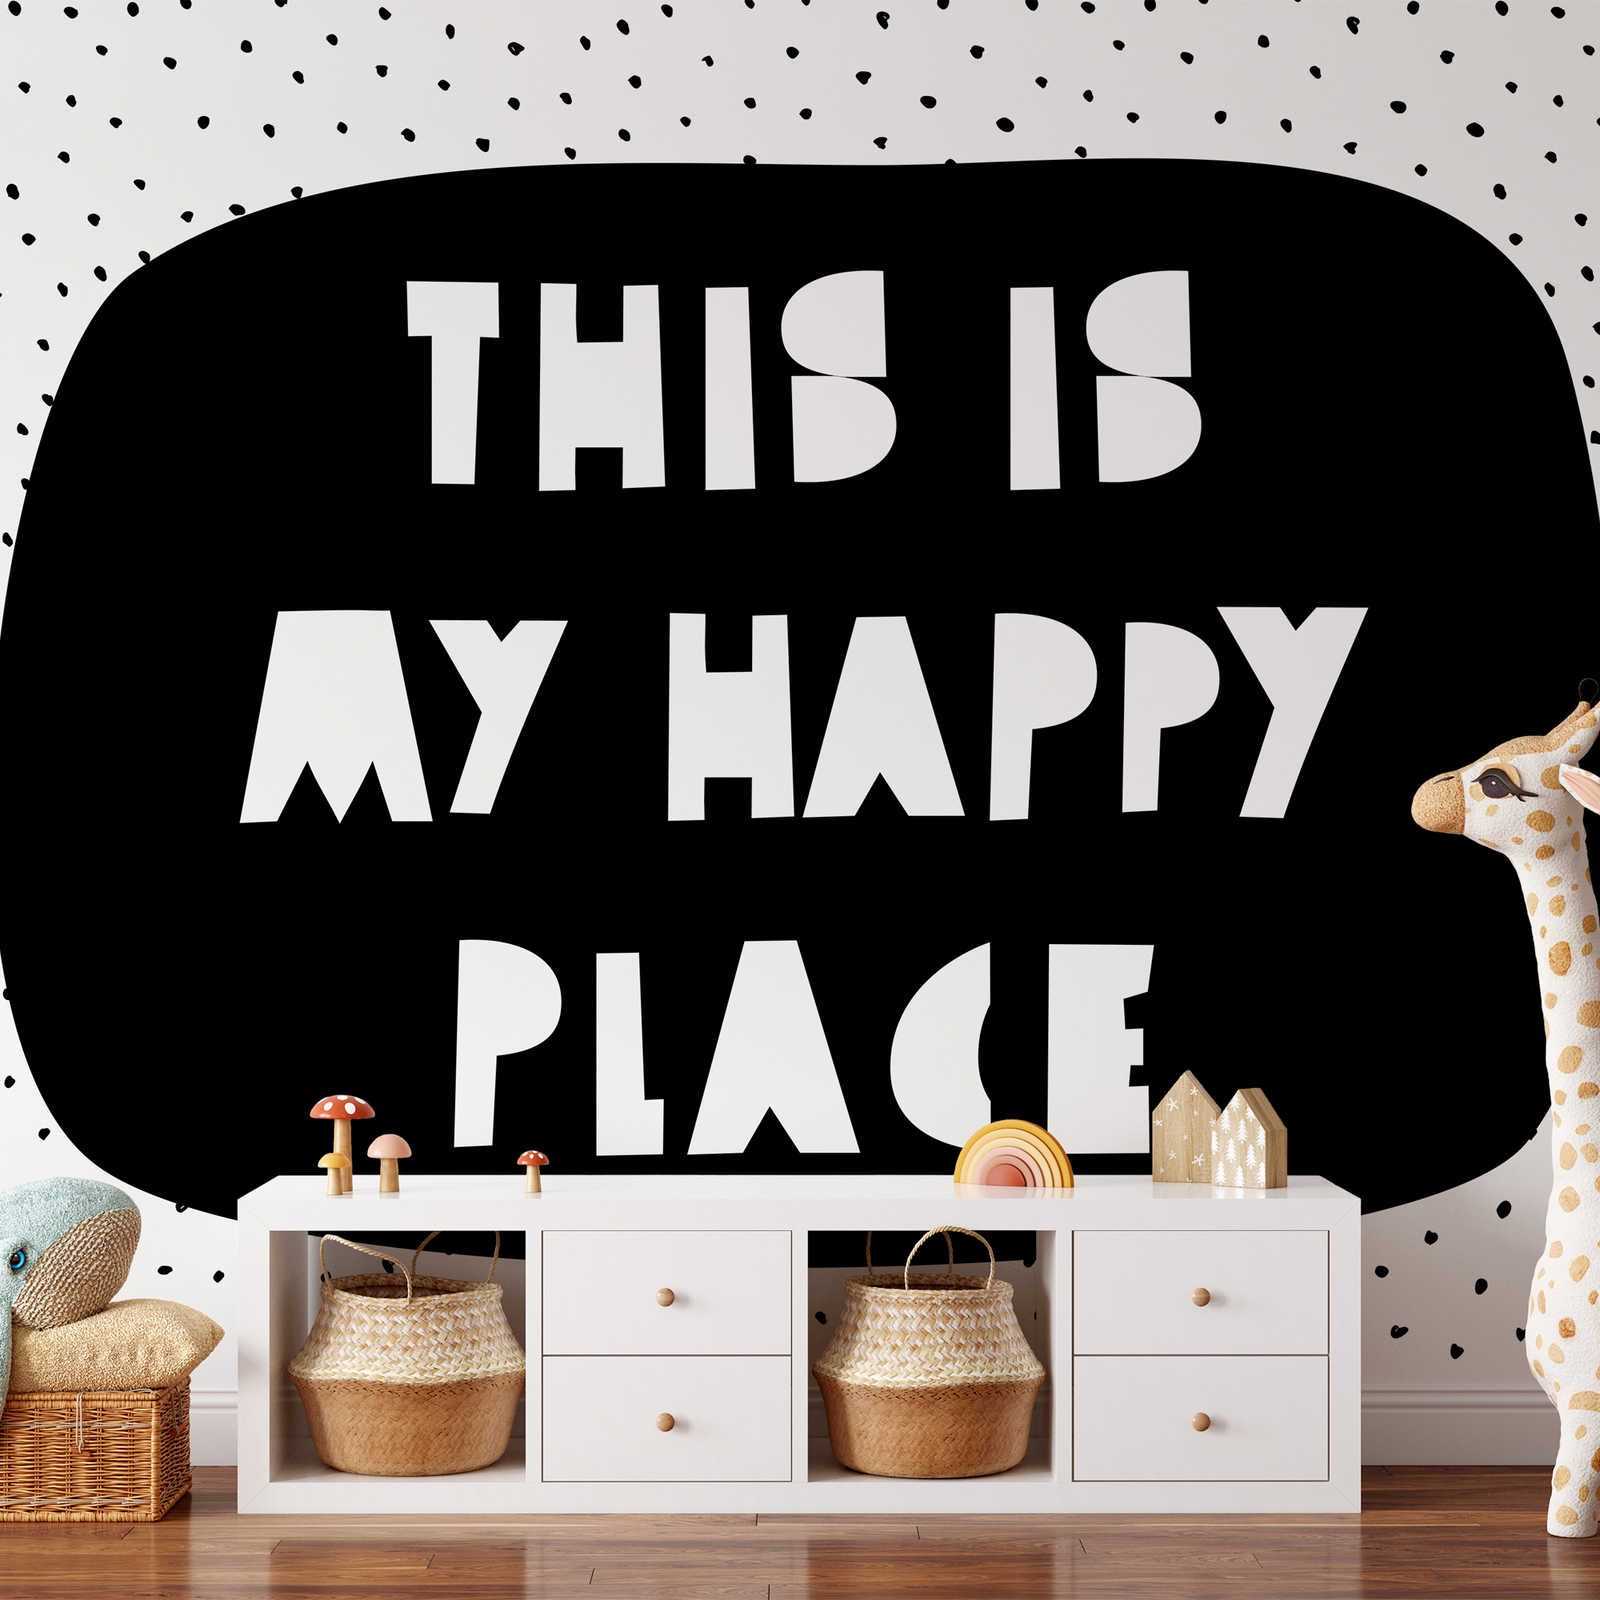         Photo wallpaper for children's room with lettering "This is my happy place" - Smooth & slightly glossy non-woven
    